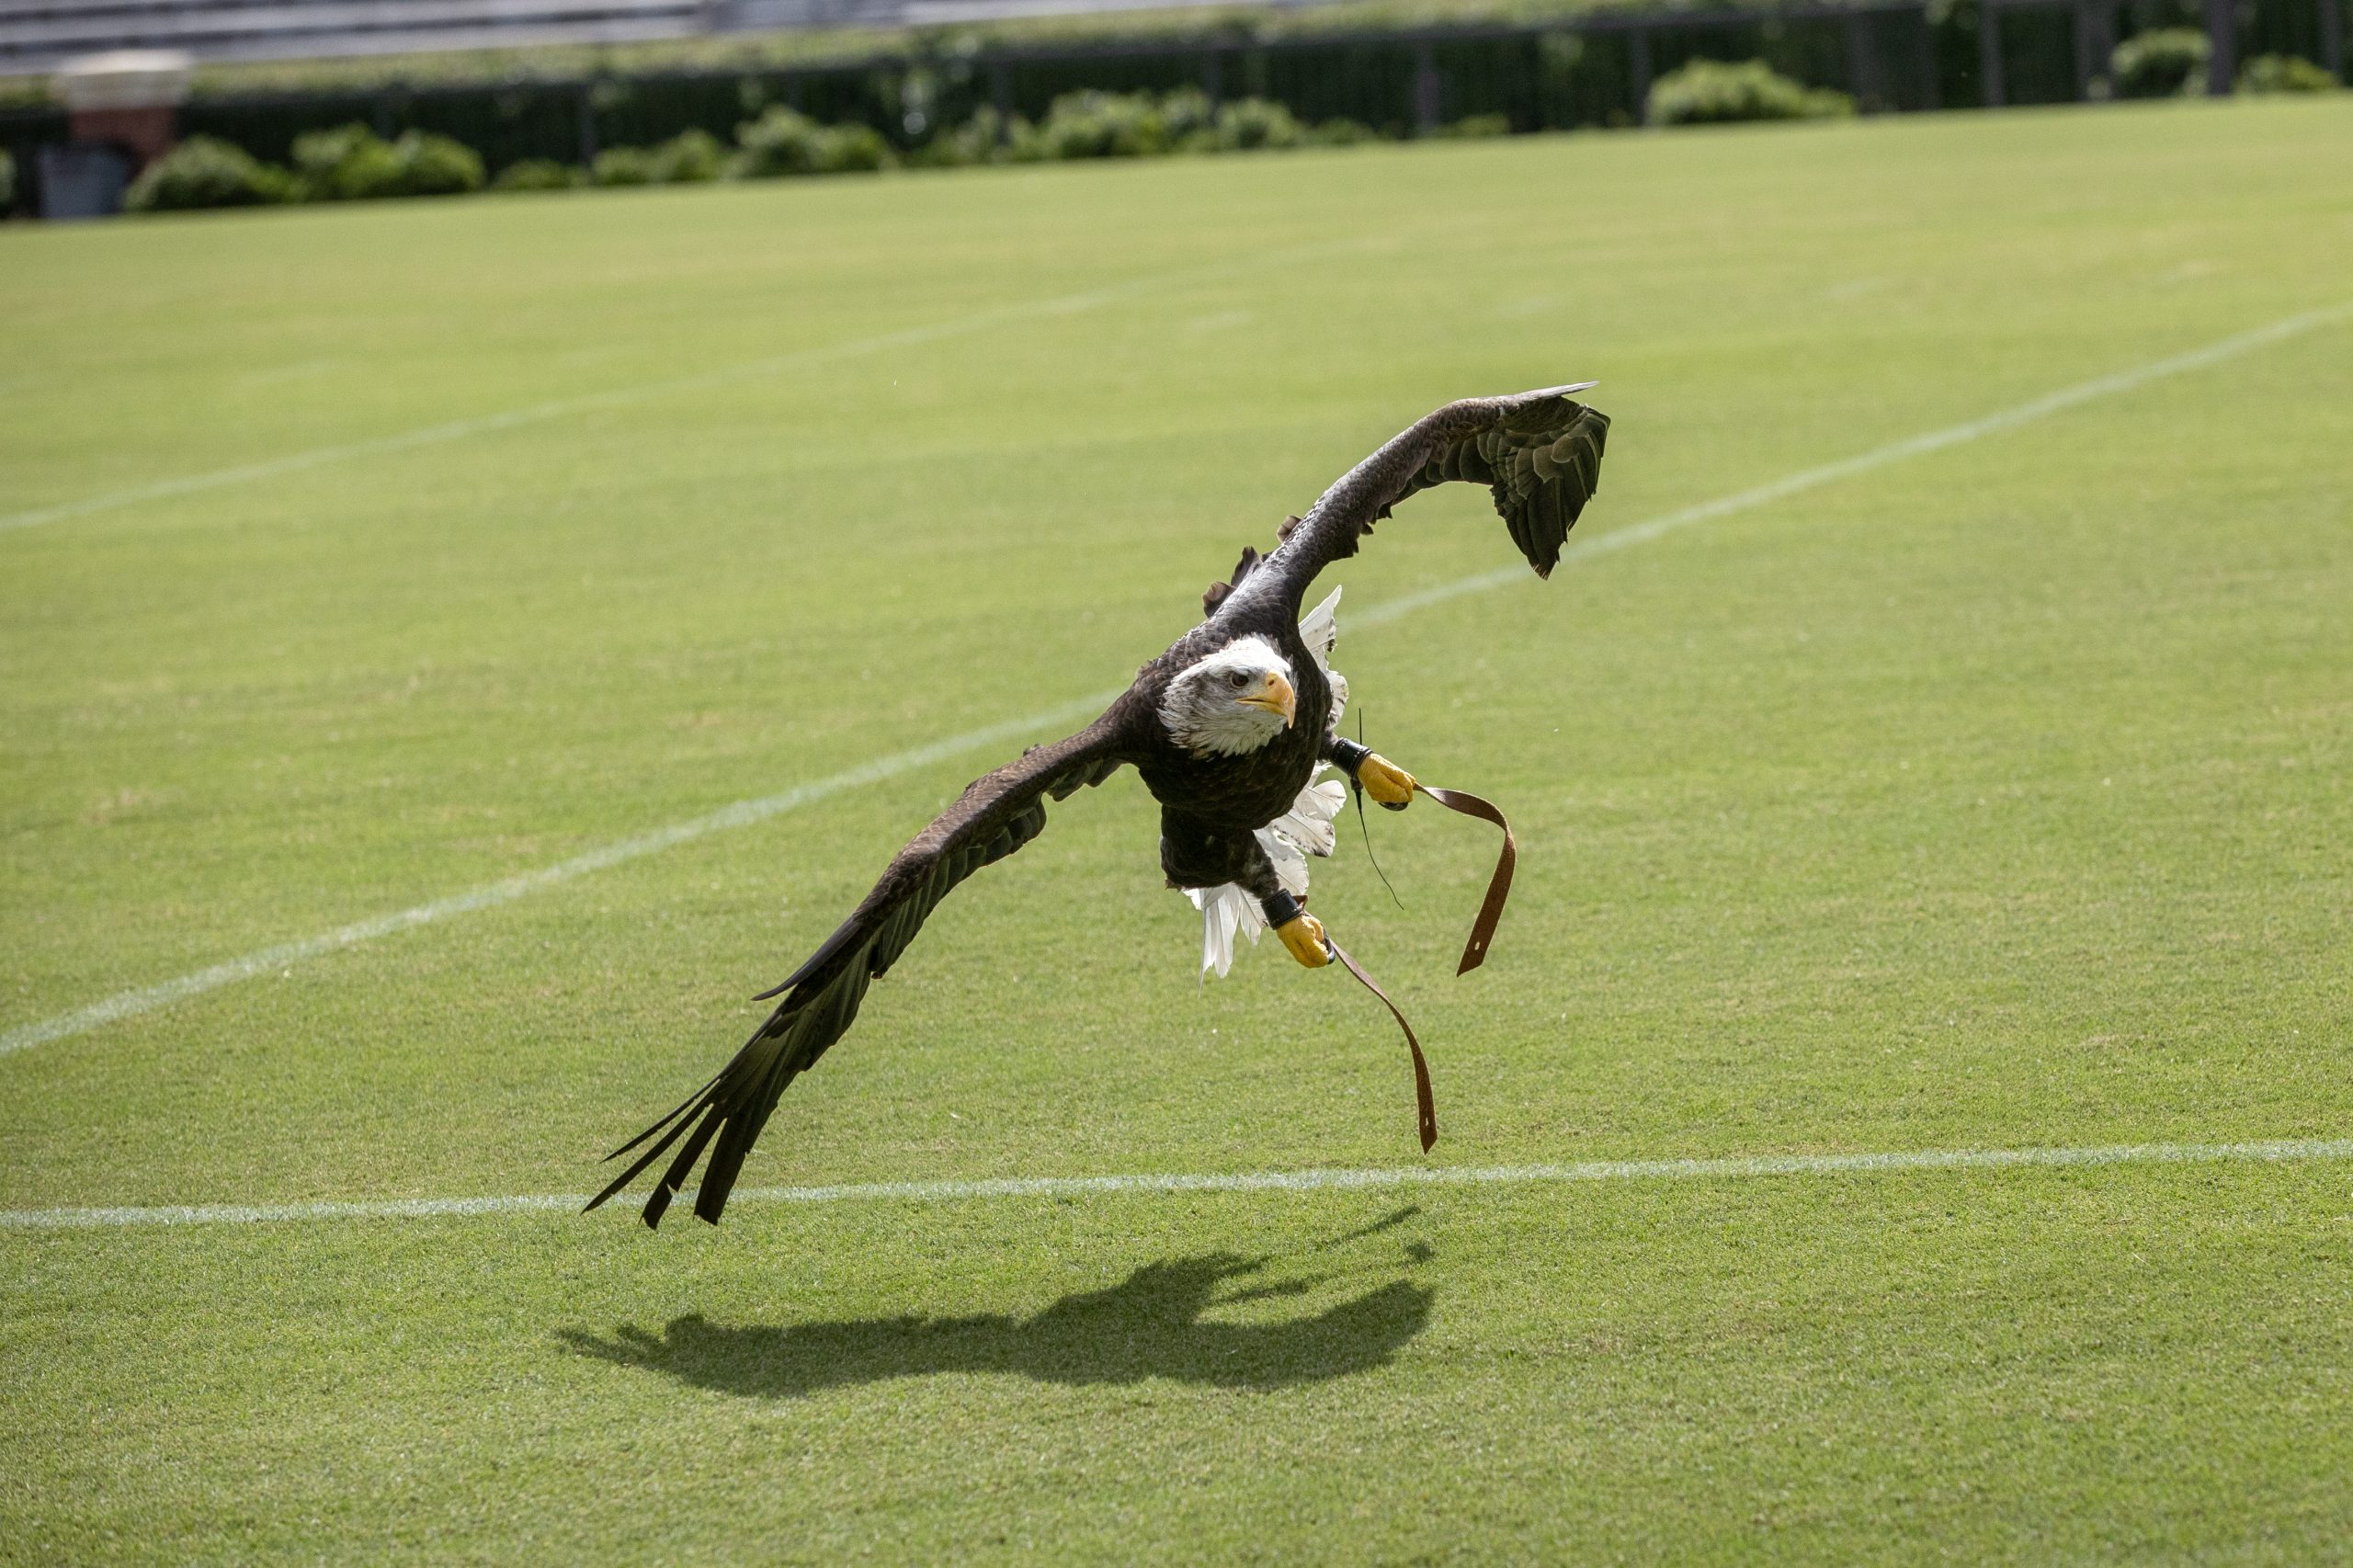 Indy landing on the football field